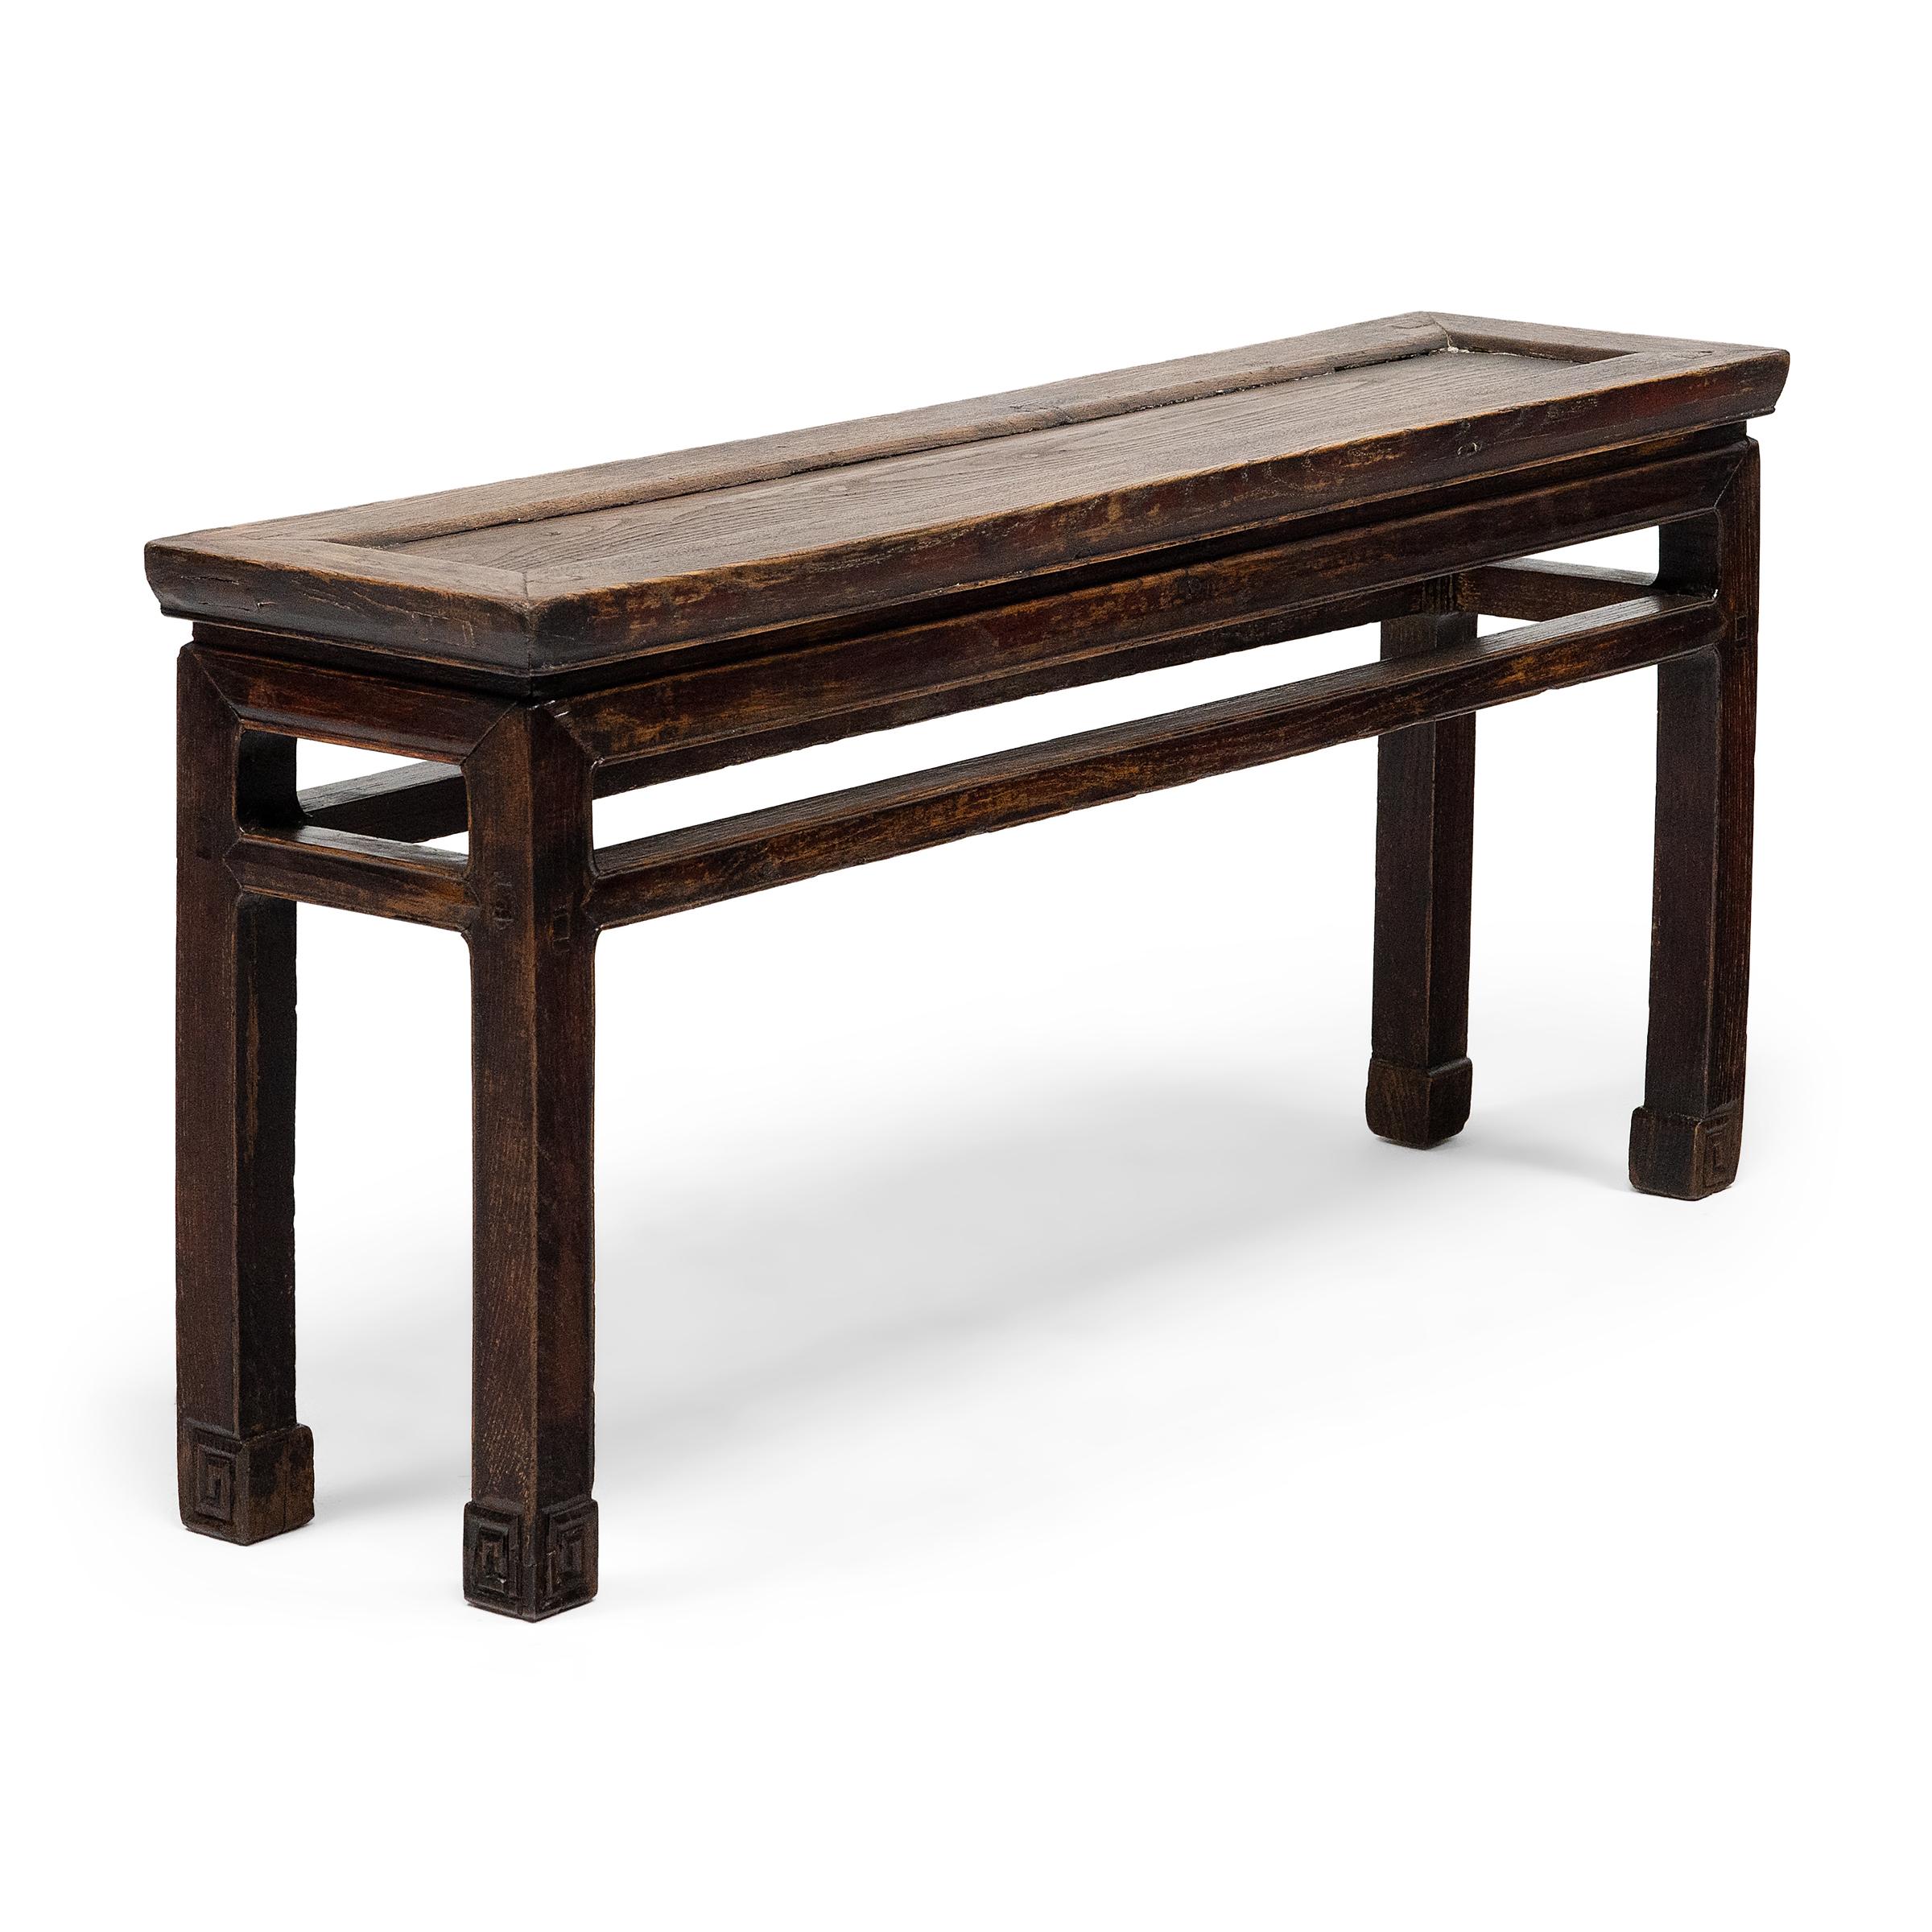 Qing Chinese Two Person Bench, c. 1800